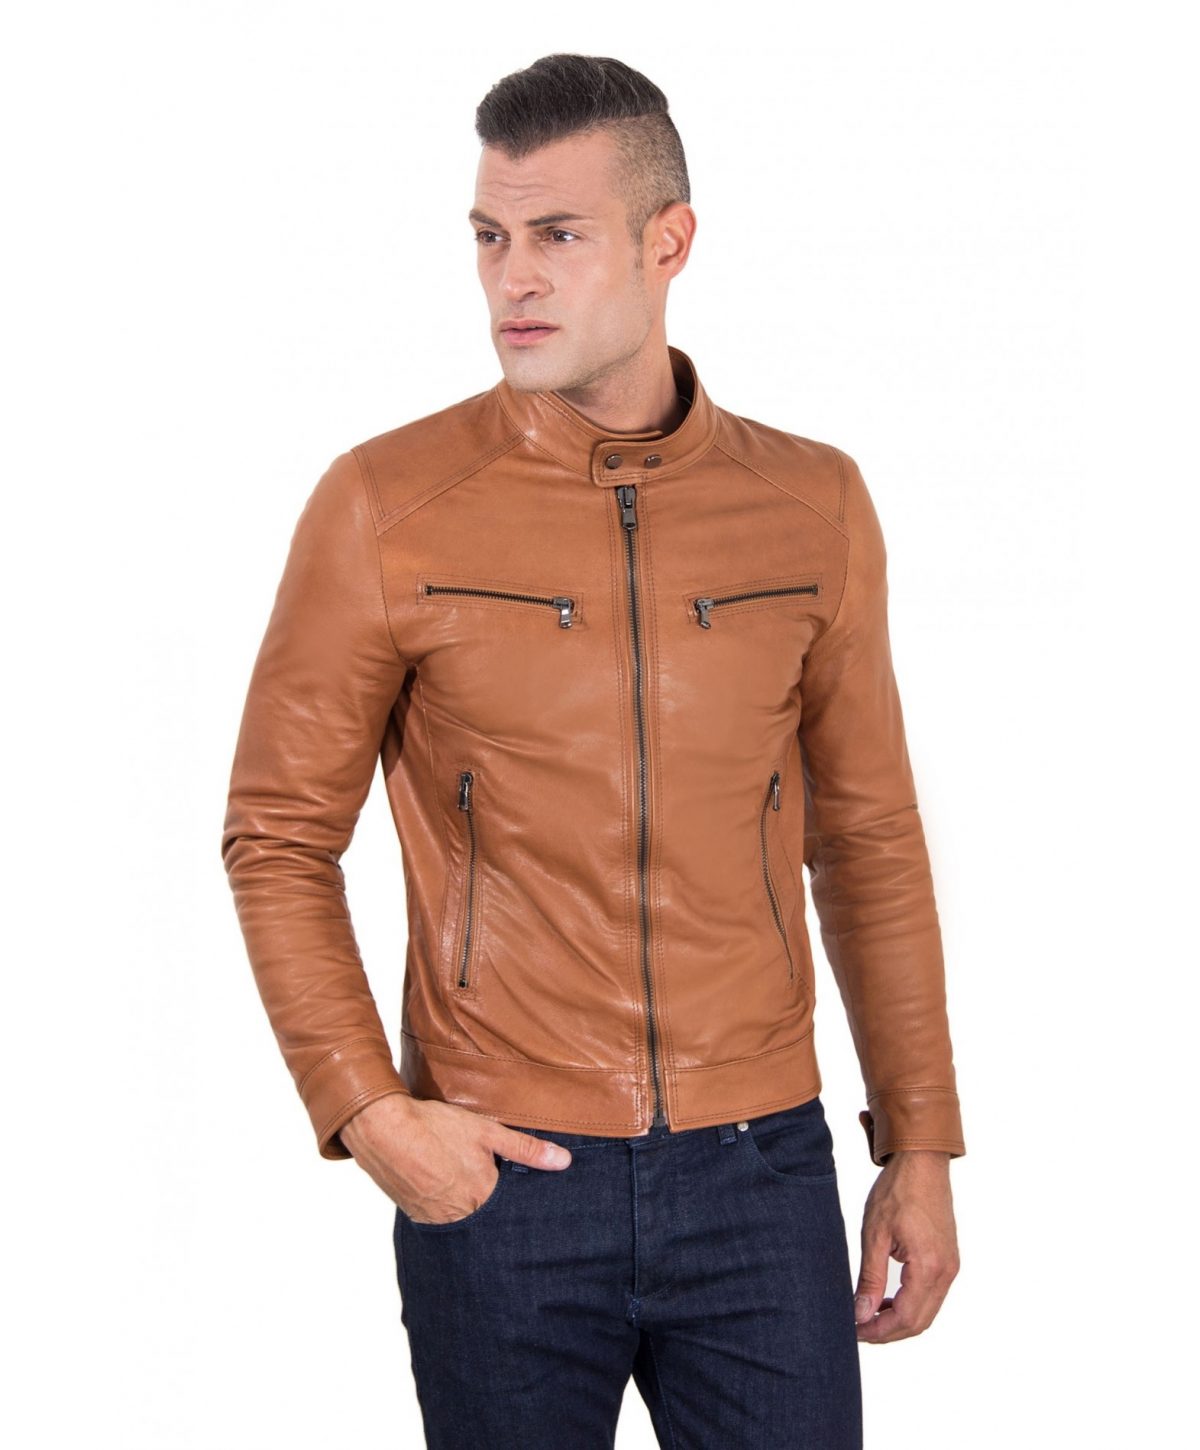 Women's Pure Leather Jacket at Rs 3600 | Women Leather Jackets in Mumbai |  ID: 15005160733